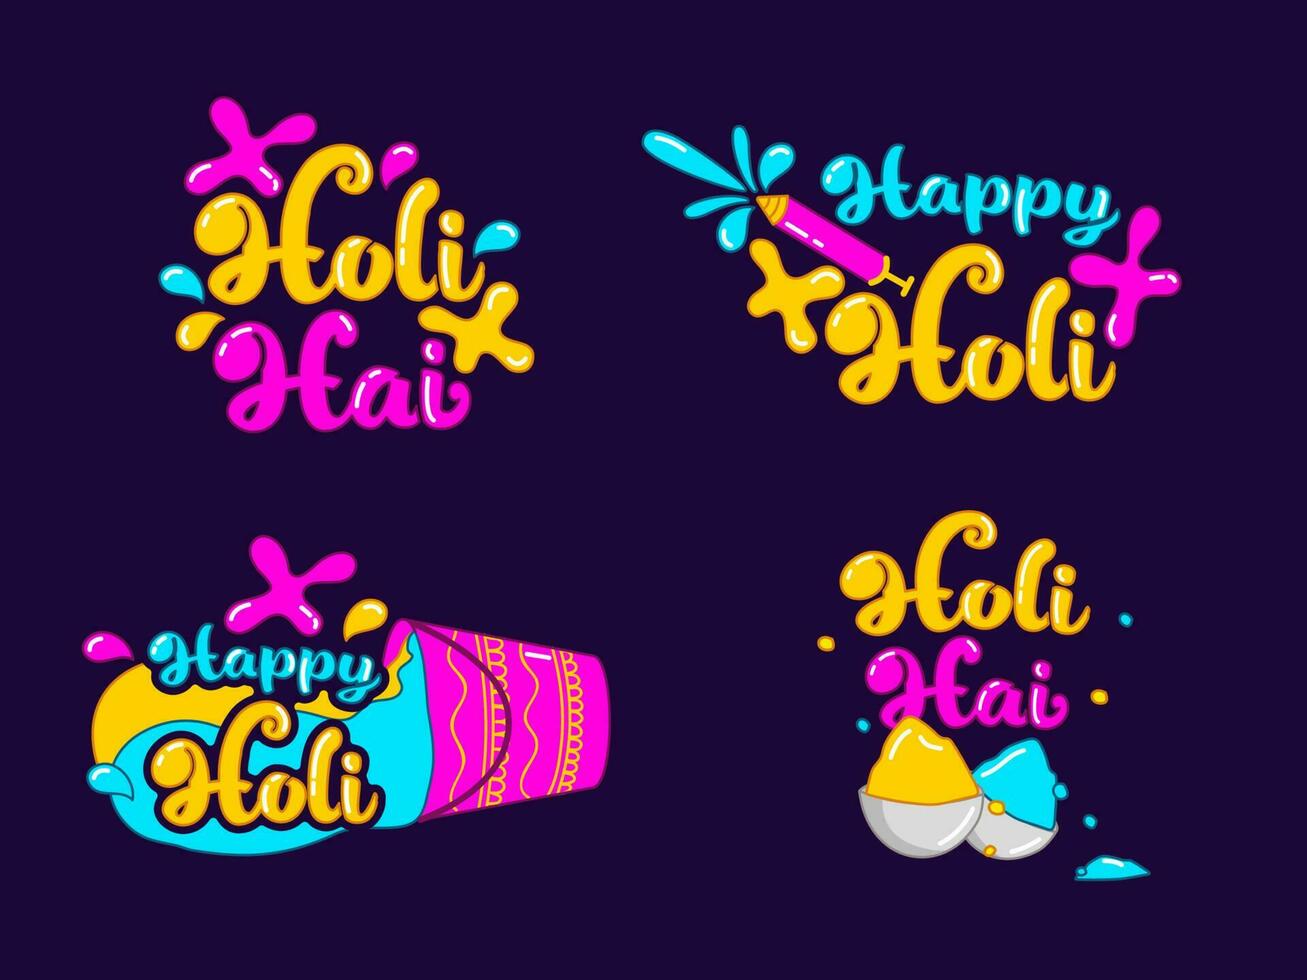 Colorful Holi Festival Font Set With Water Gun, Color Bowls, Bucket And Splash Effect Against Purple Background. vector